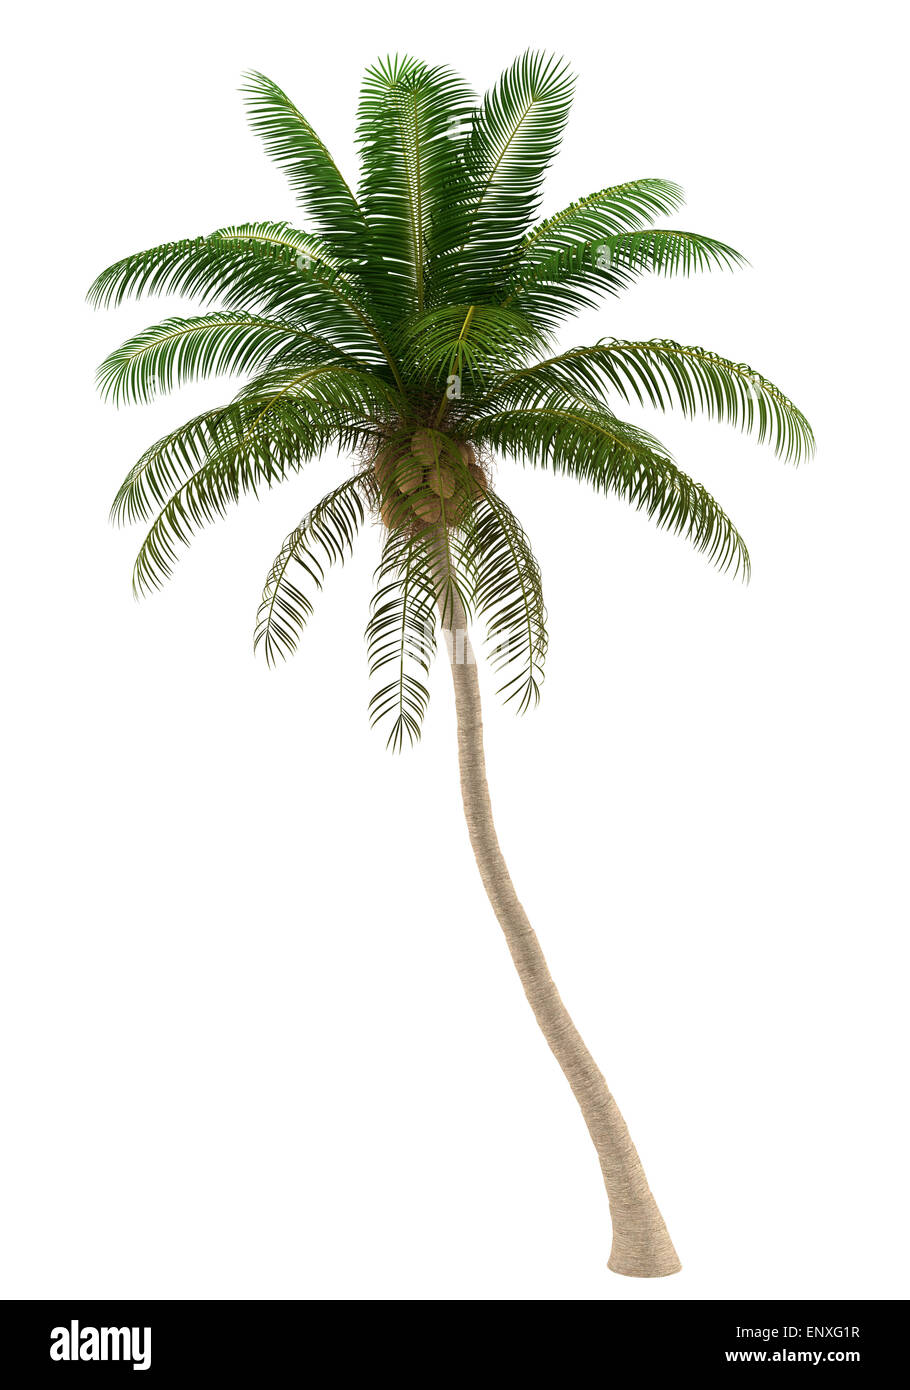 coconut palm tree isolated on white background Stock Photo